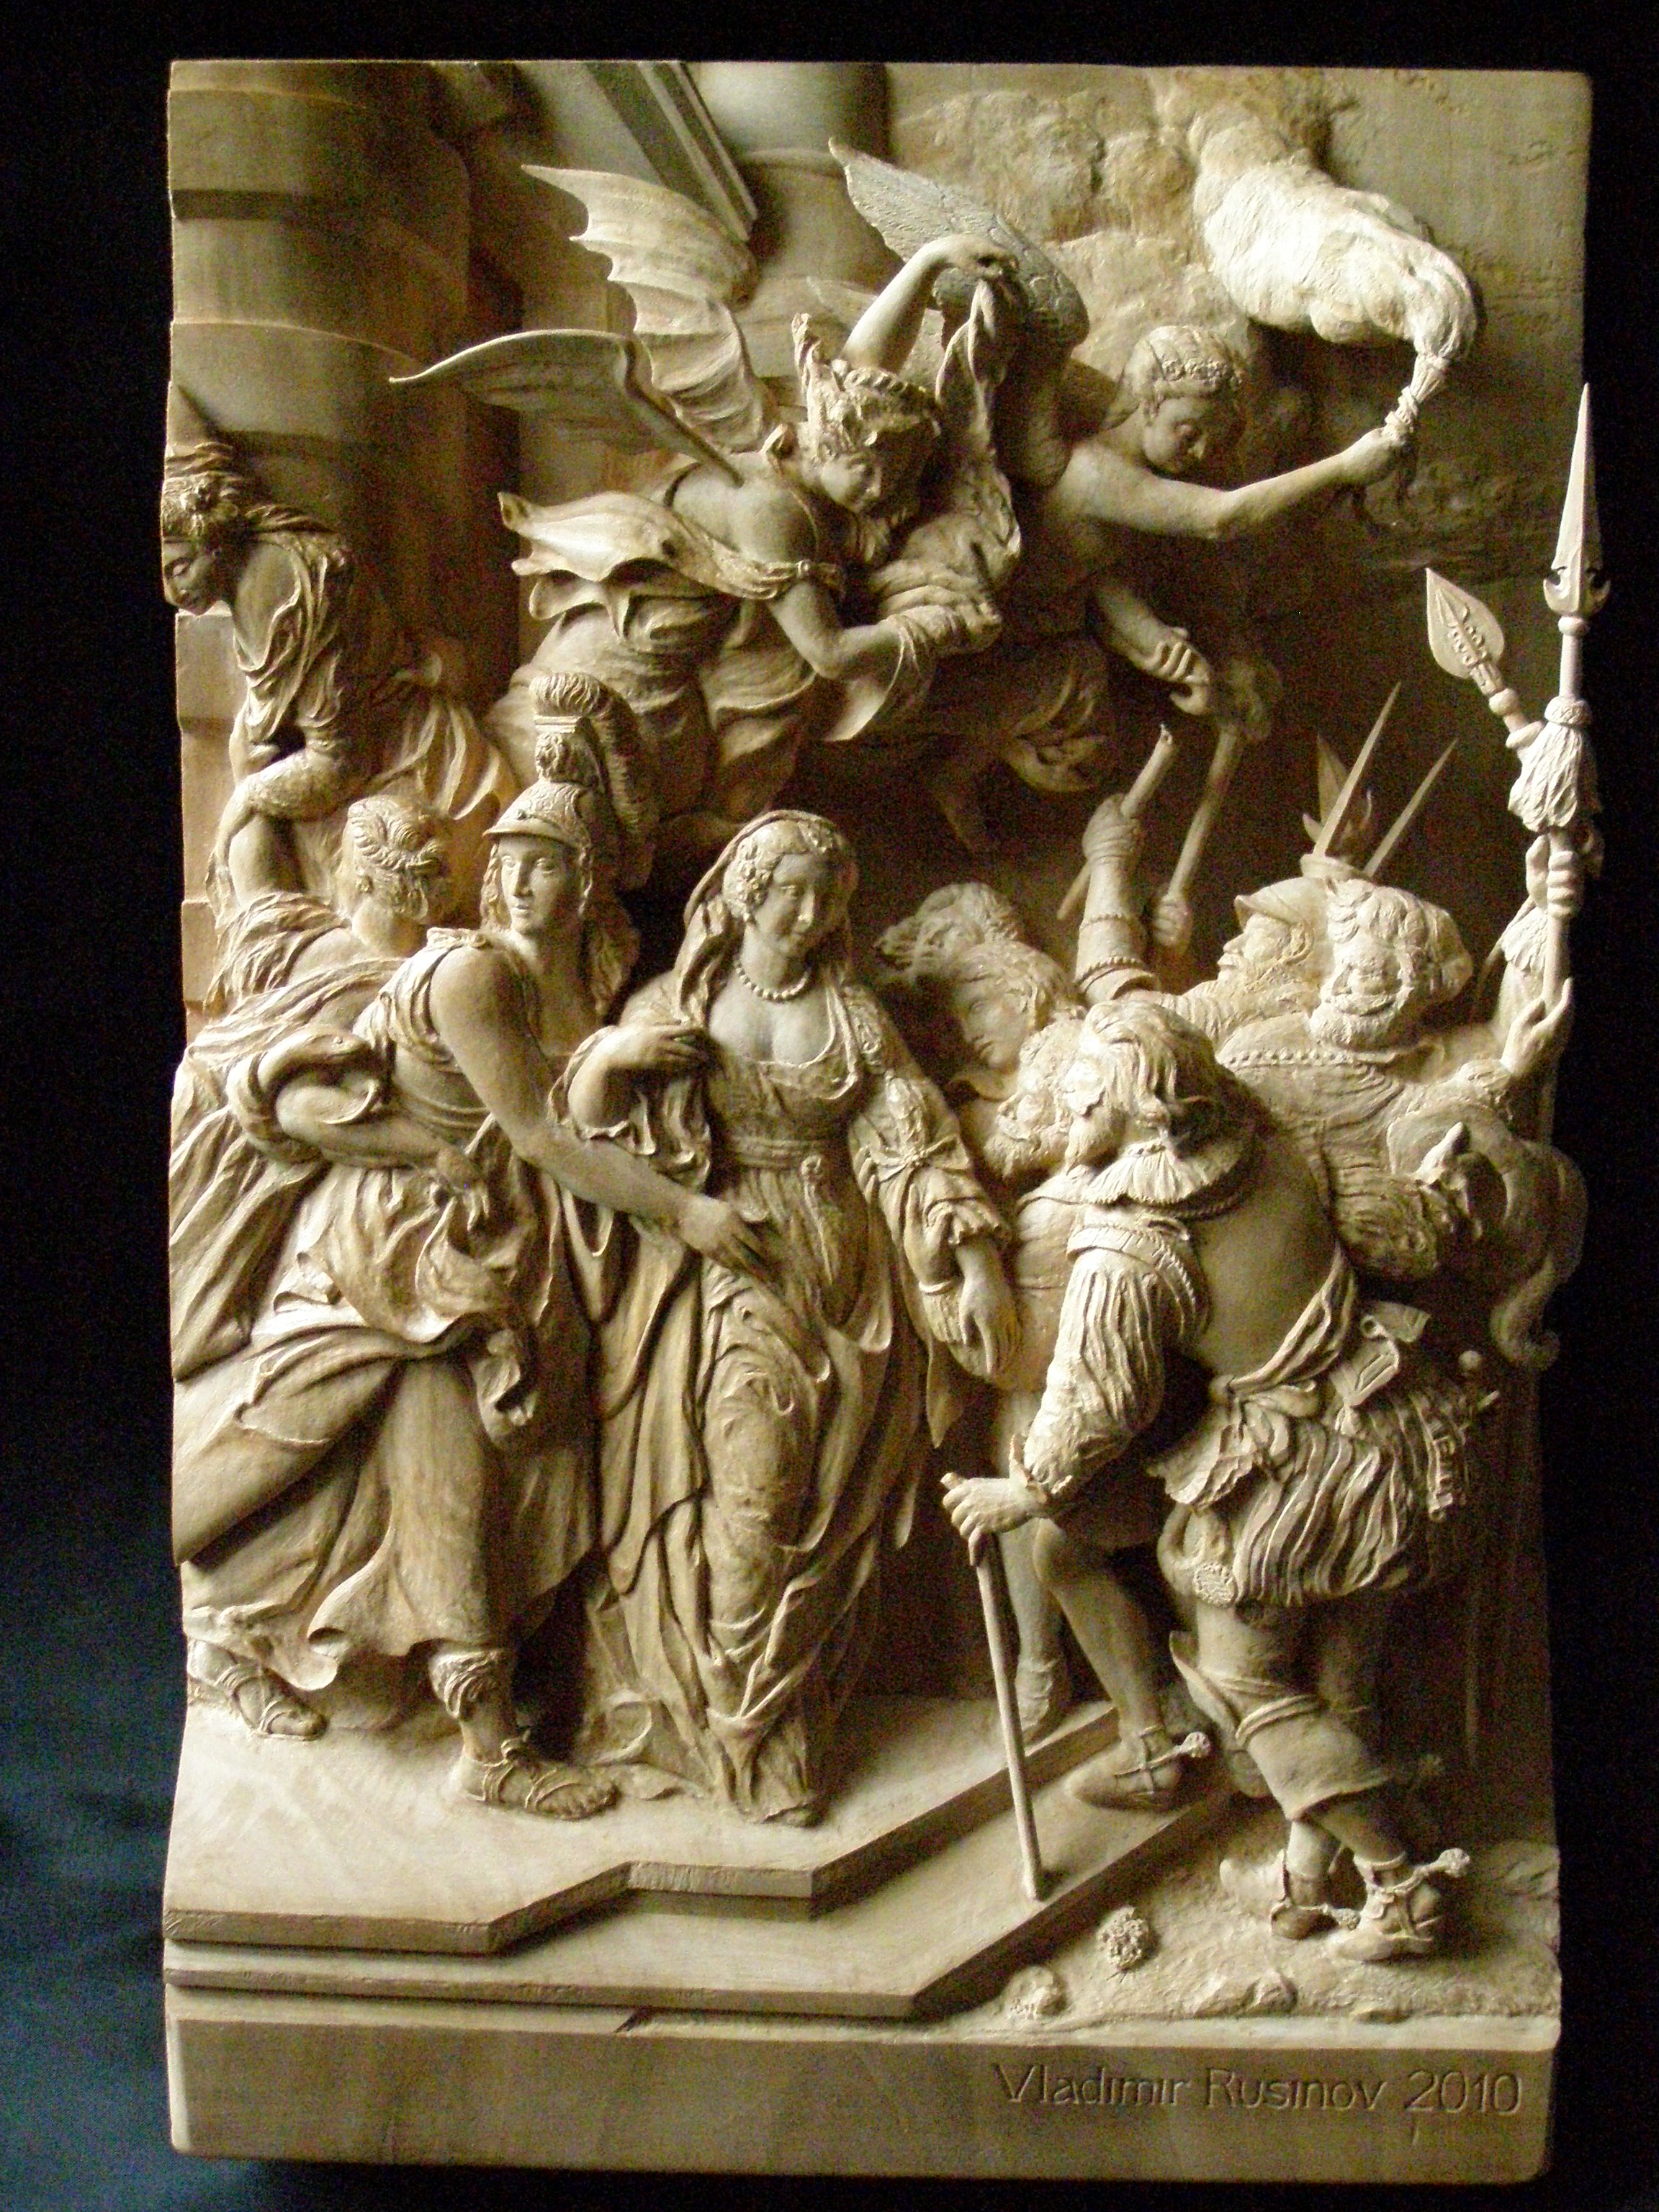 Vladimir Rusinov; Escape Of Queen From Lock..., 2010, Original Sculpture Wood, 18 x 26 cm. Artwork description: 241  I would like to show my new art brand: Paintings of P. P. Rubens ( 17- 18th century) - - > The canvases of Rubens in J. M. Nattie engravings ( 18th century ) - - - > Ruben' s artworks in high relief images of Vladimir Rusinov ( 21- th century ) . ...